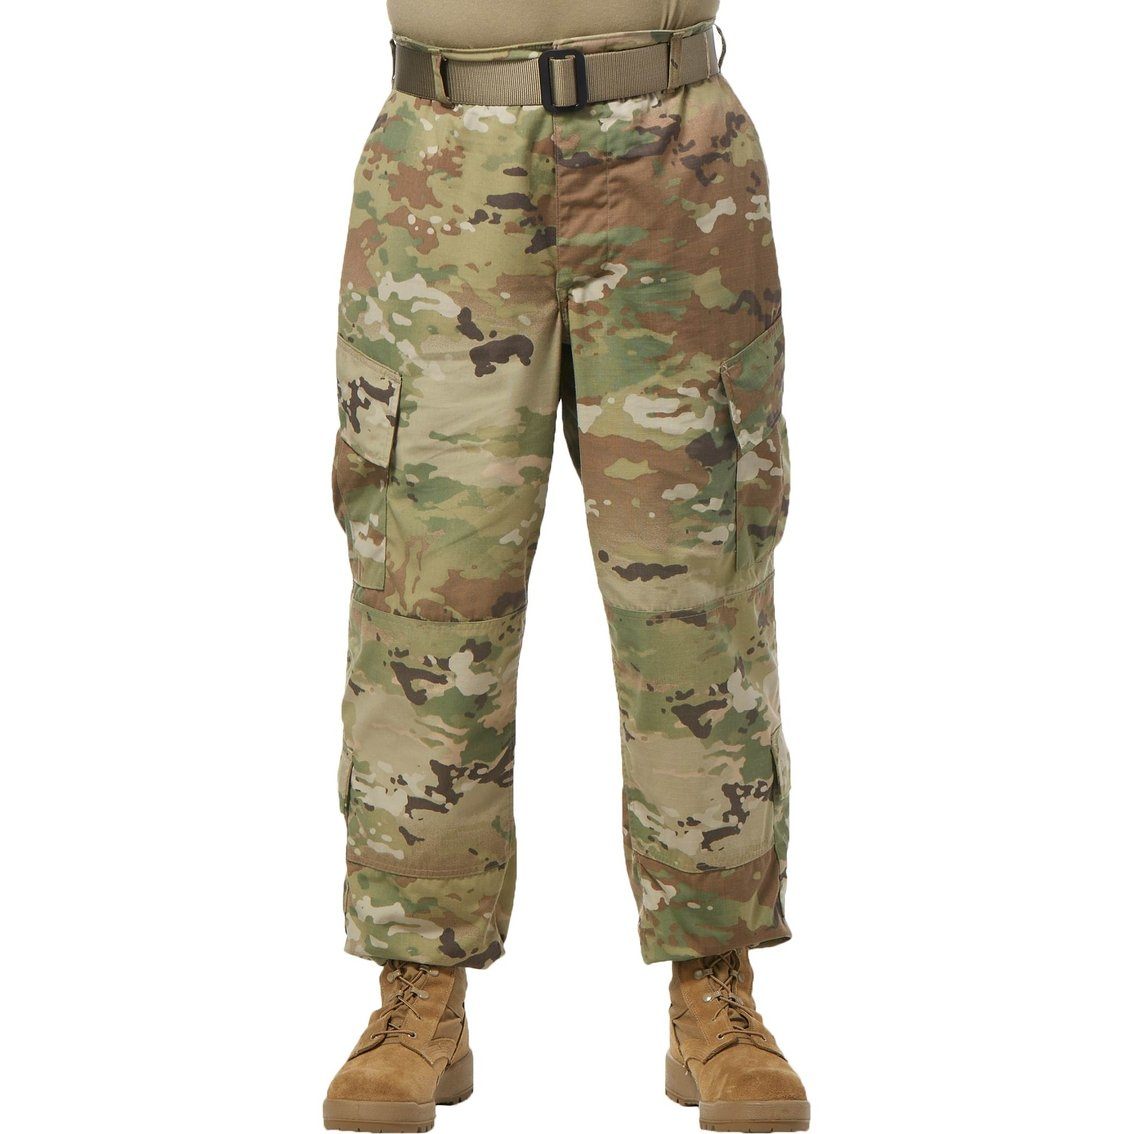 UNFRM OUTDOOR STANDARD MILITARY PANTS